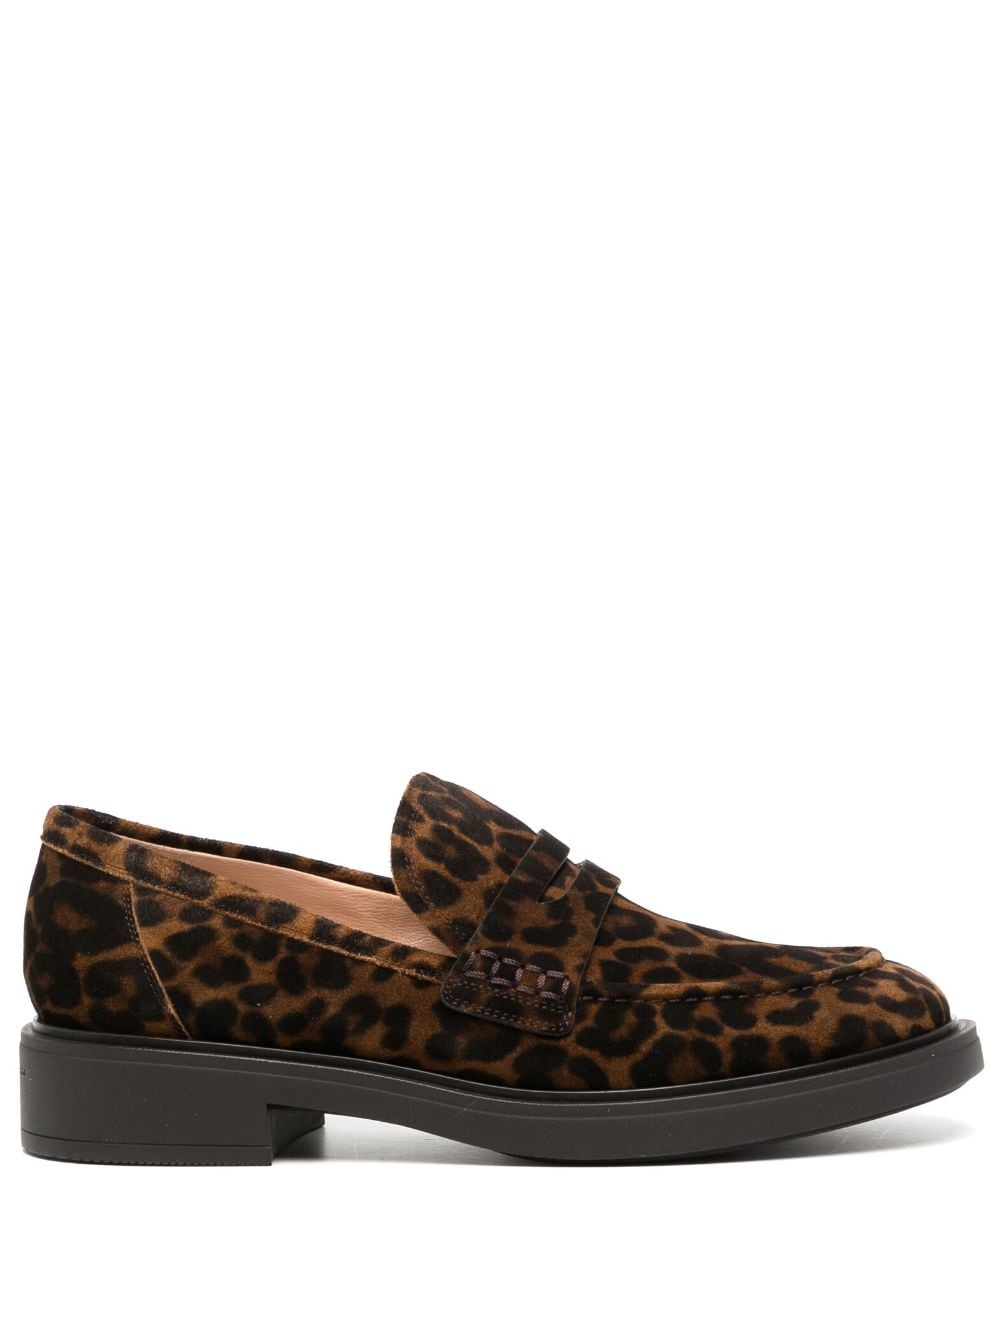 Gianvito Rossi Leopard-print Leather Loafers In Brown